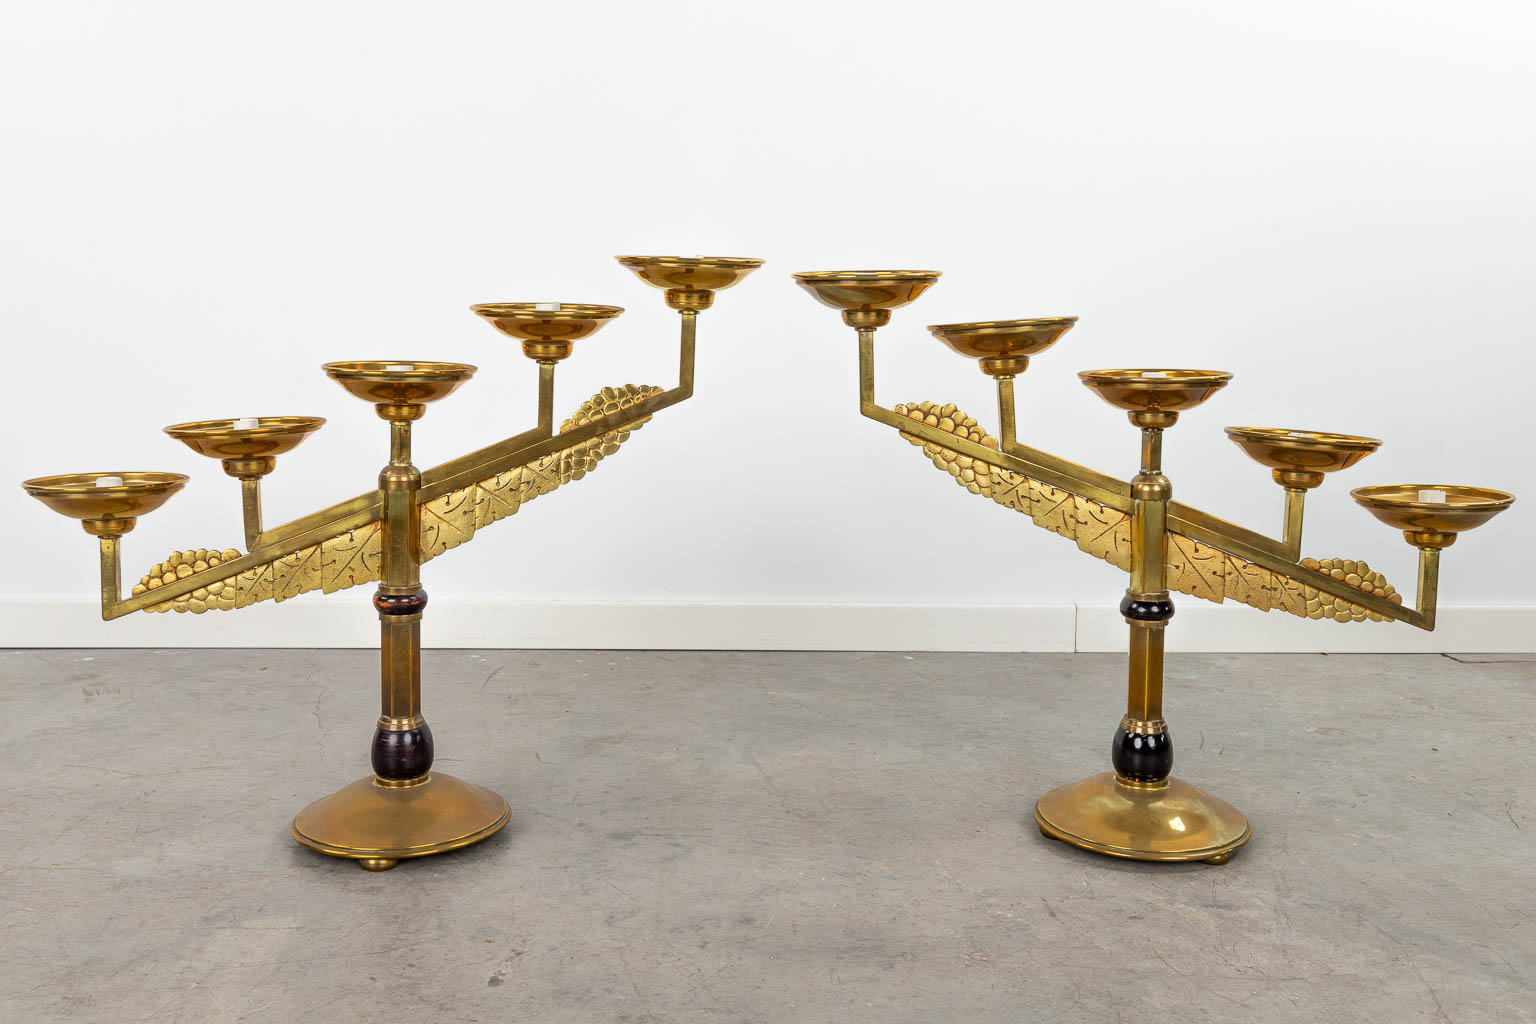 A collection of 2 pairs of candlesticks made of bronze in art deco style. (H:53cm)